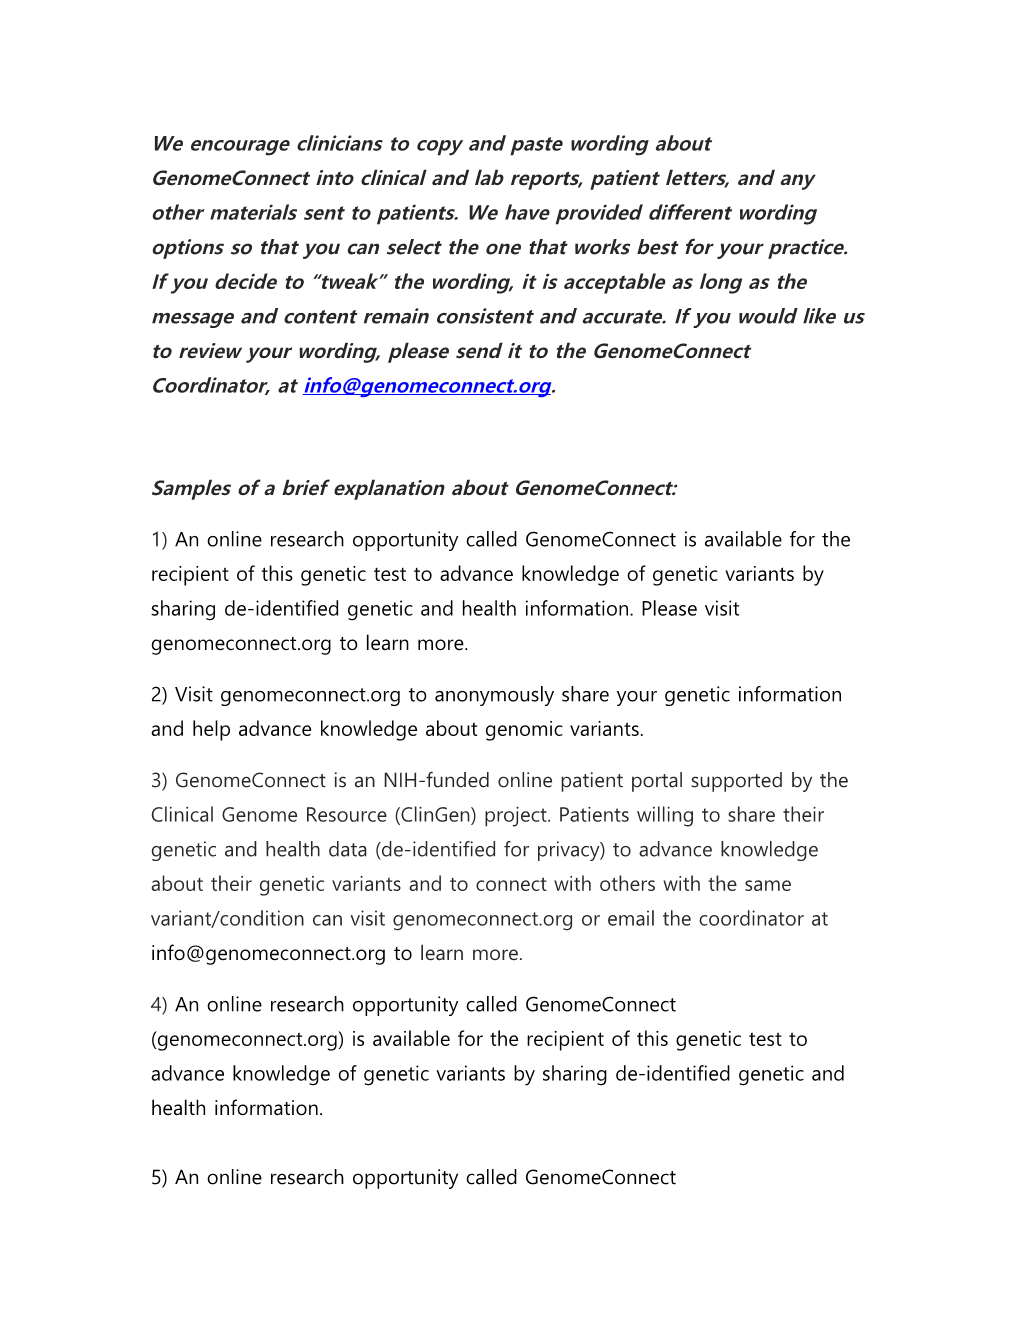 Samples of a Brief Explanation About Genomeconnect